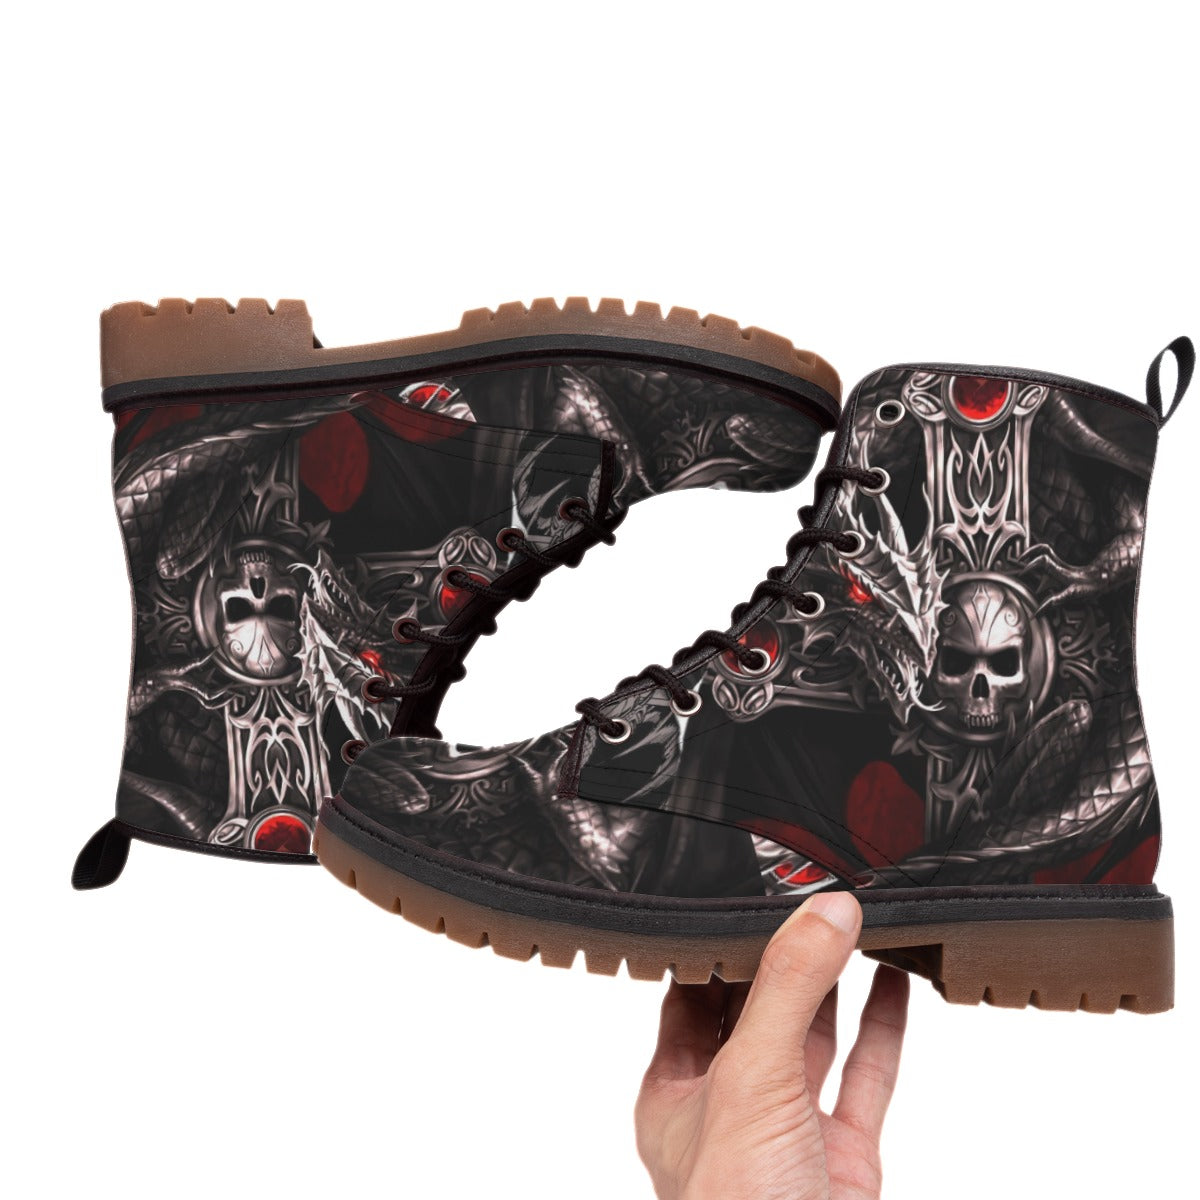 Dragon skull gothic boots shoes, Skeleton Halloween men's women's boots shoes